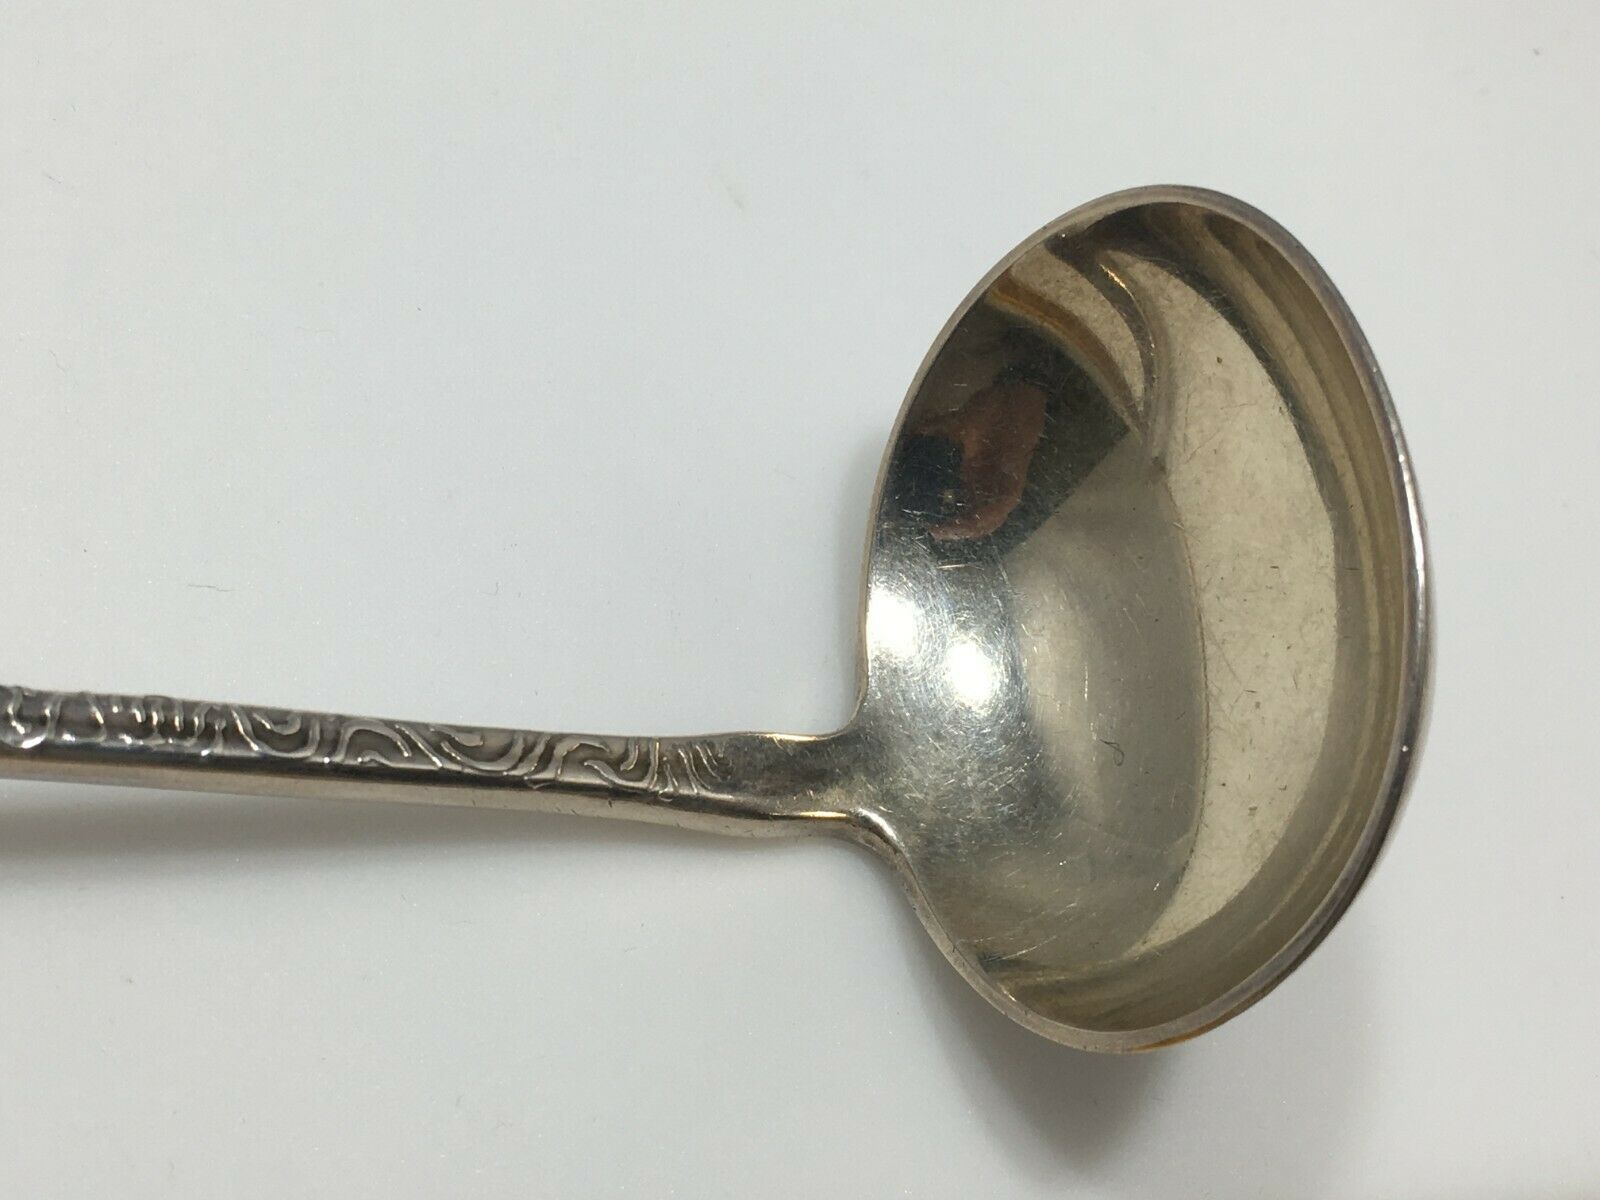 Tiffany & Co Sterling Silver Lapover Edge Etched Lap Over Gravy Ladle